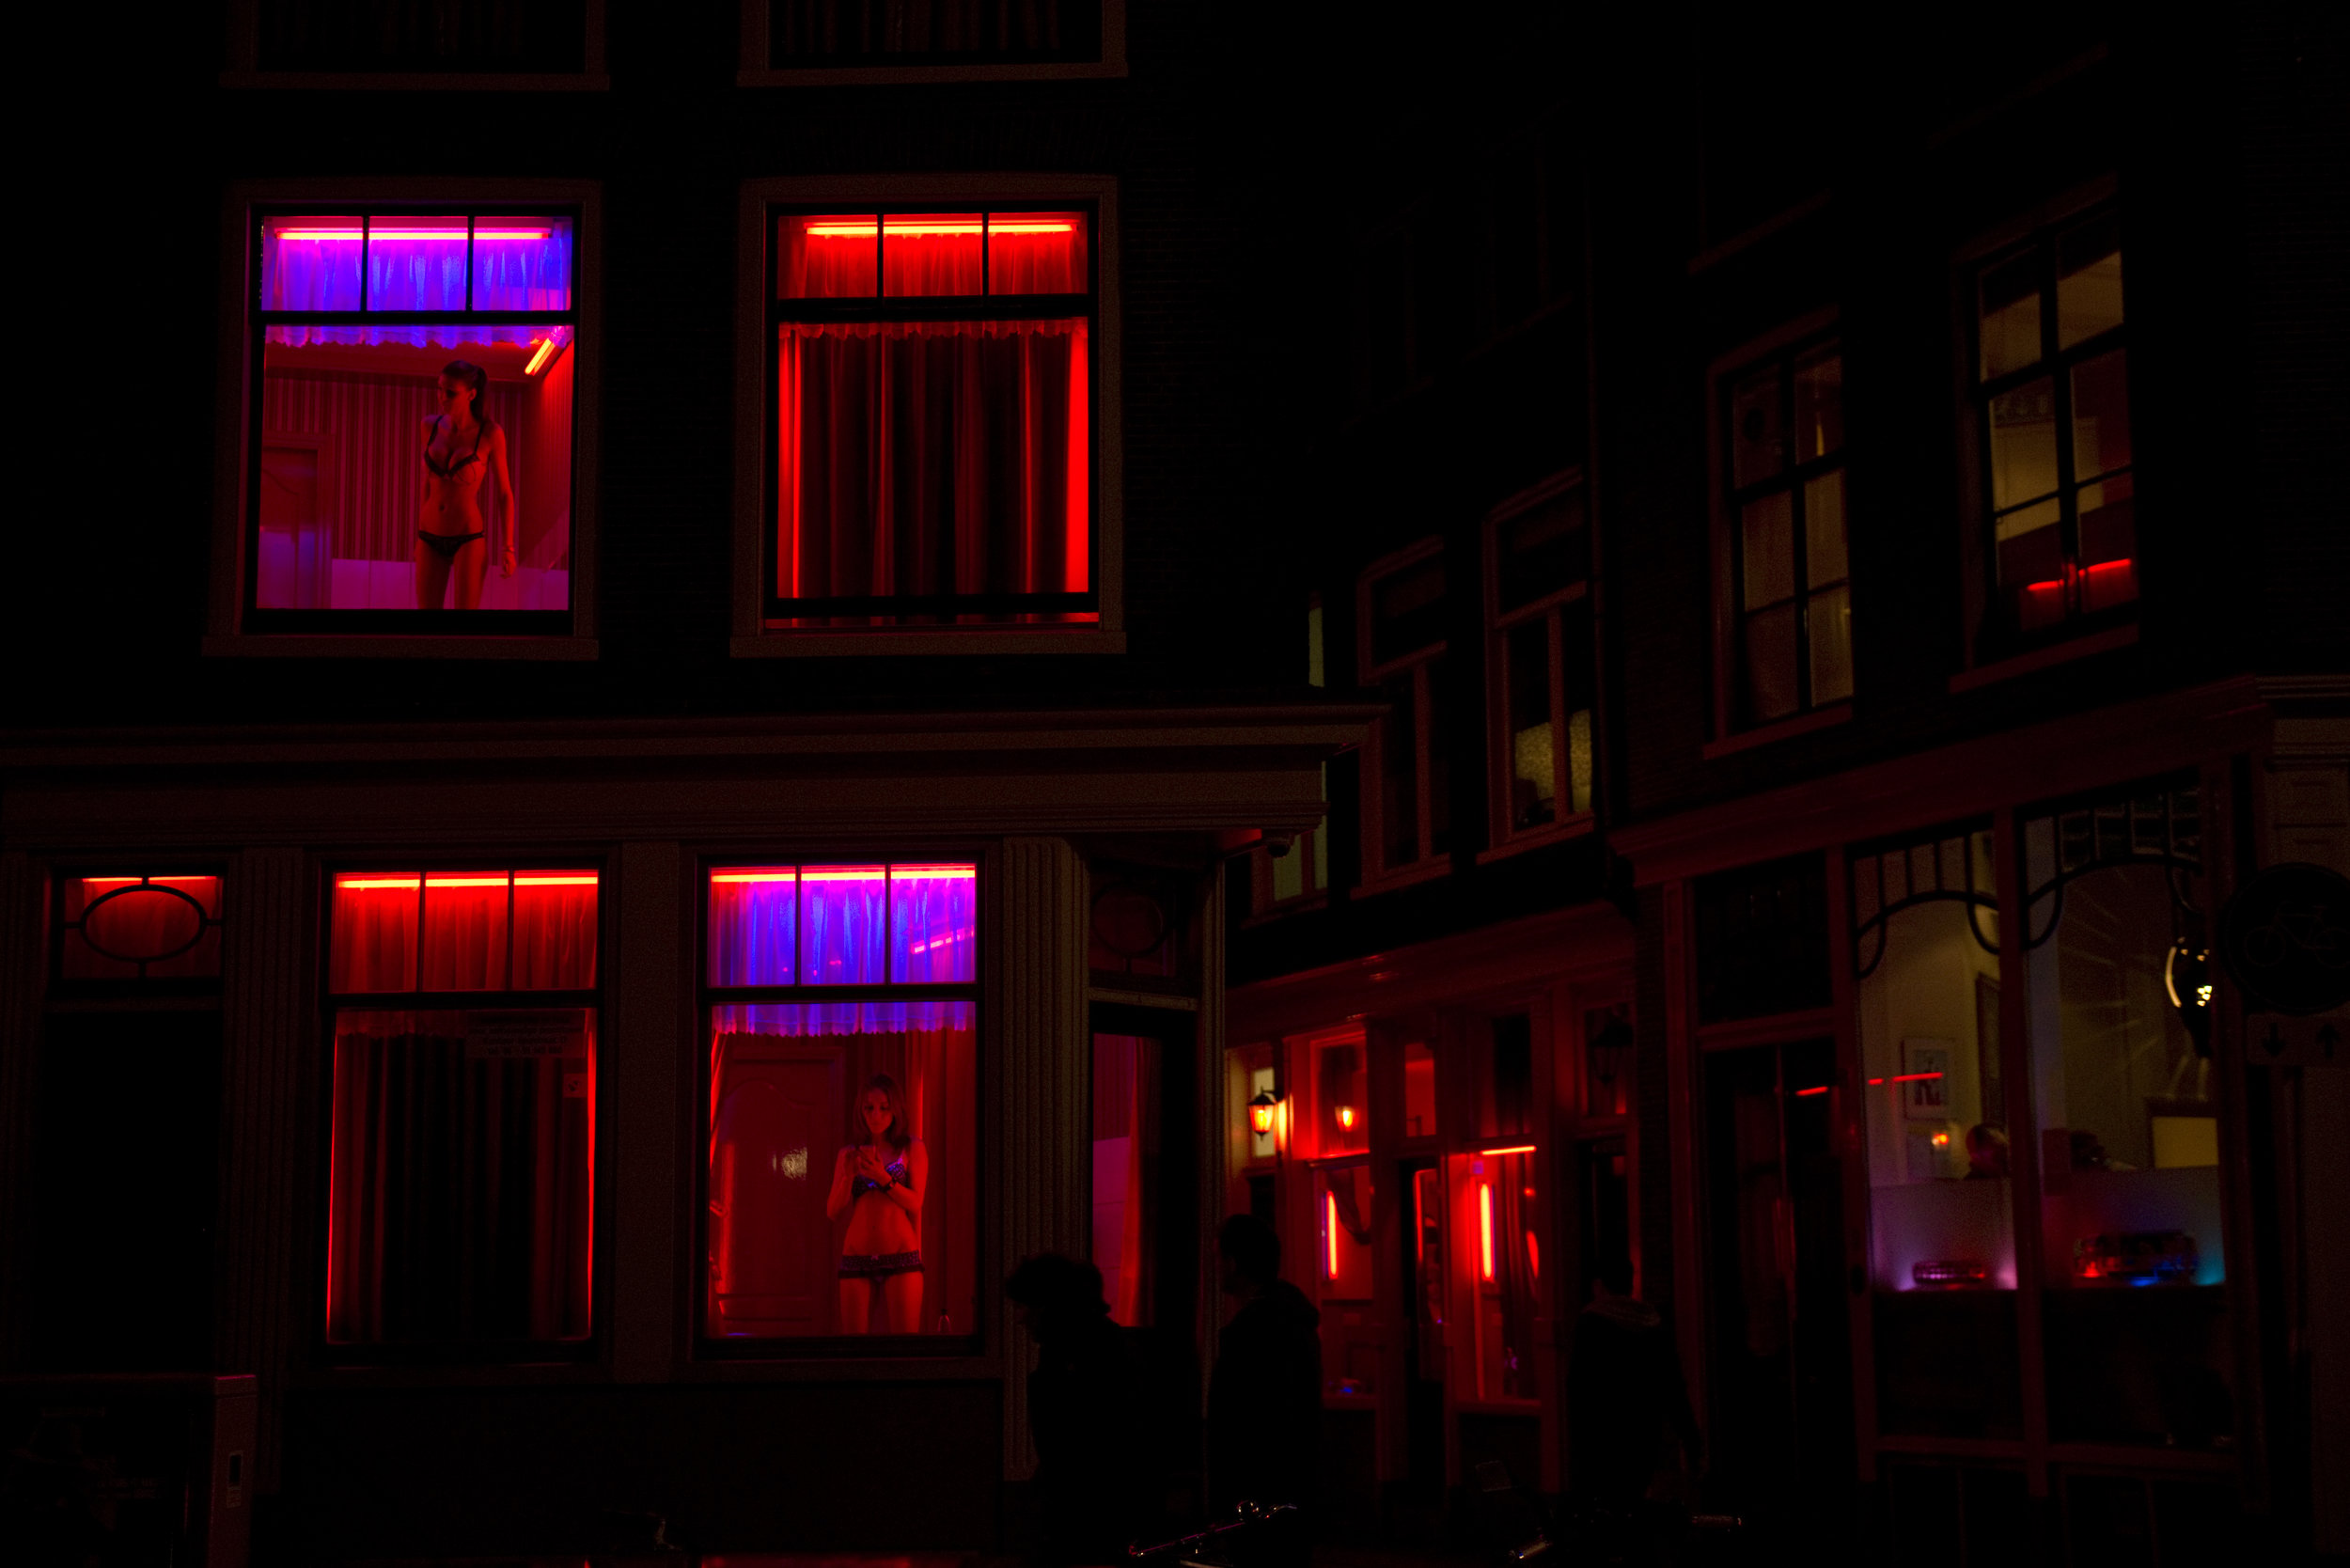  Two workers renting out rooms in Amsterdam's Red Light District,  De Wallen , wait for customers during the night. Prostitution is legal and strictly regulated in the Netherlands. 